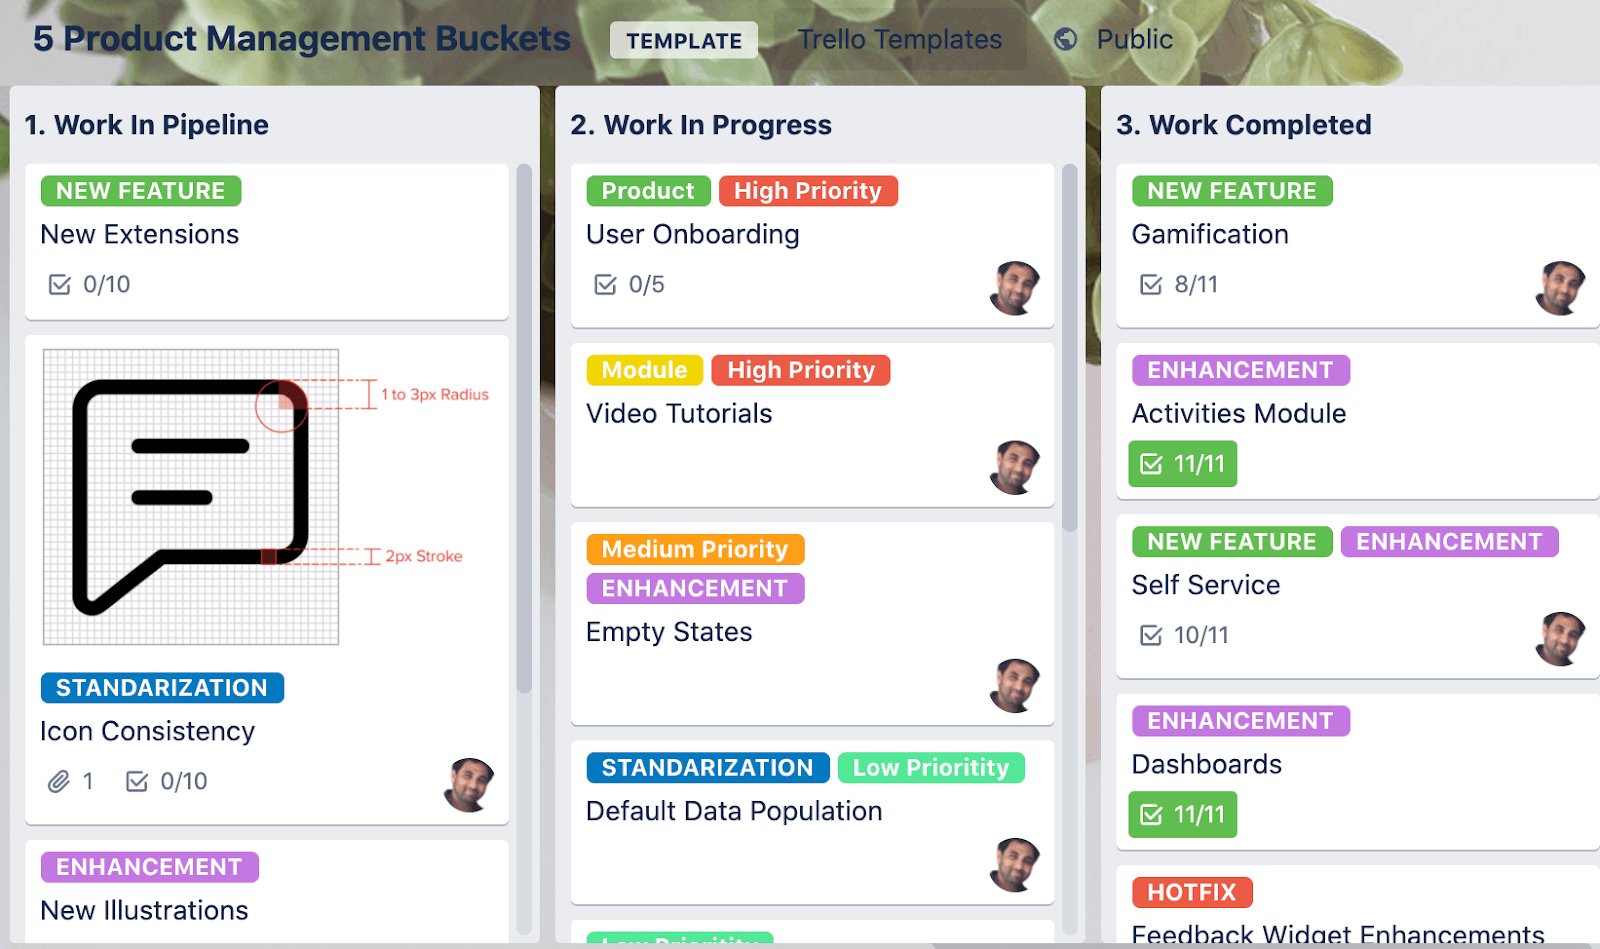 trello label to categorize your tasks